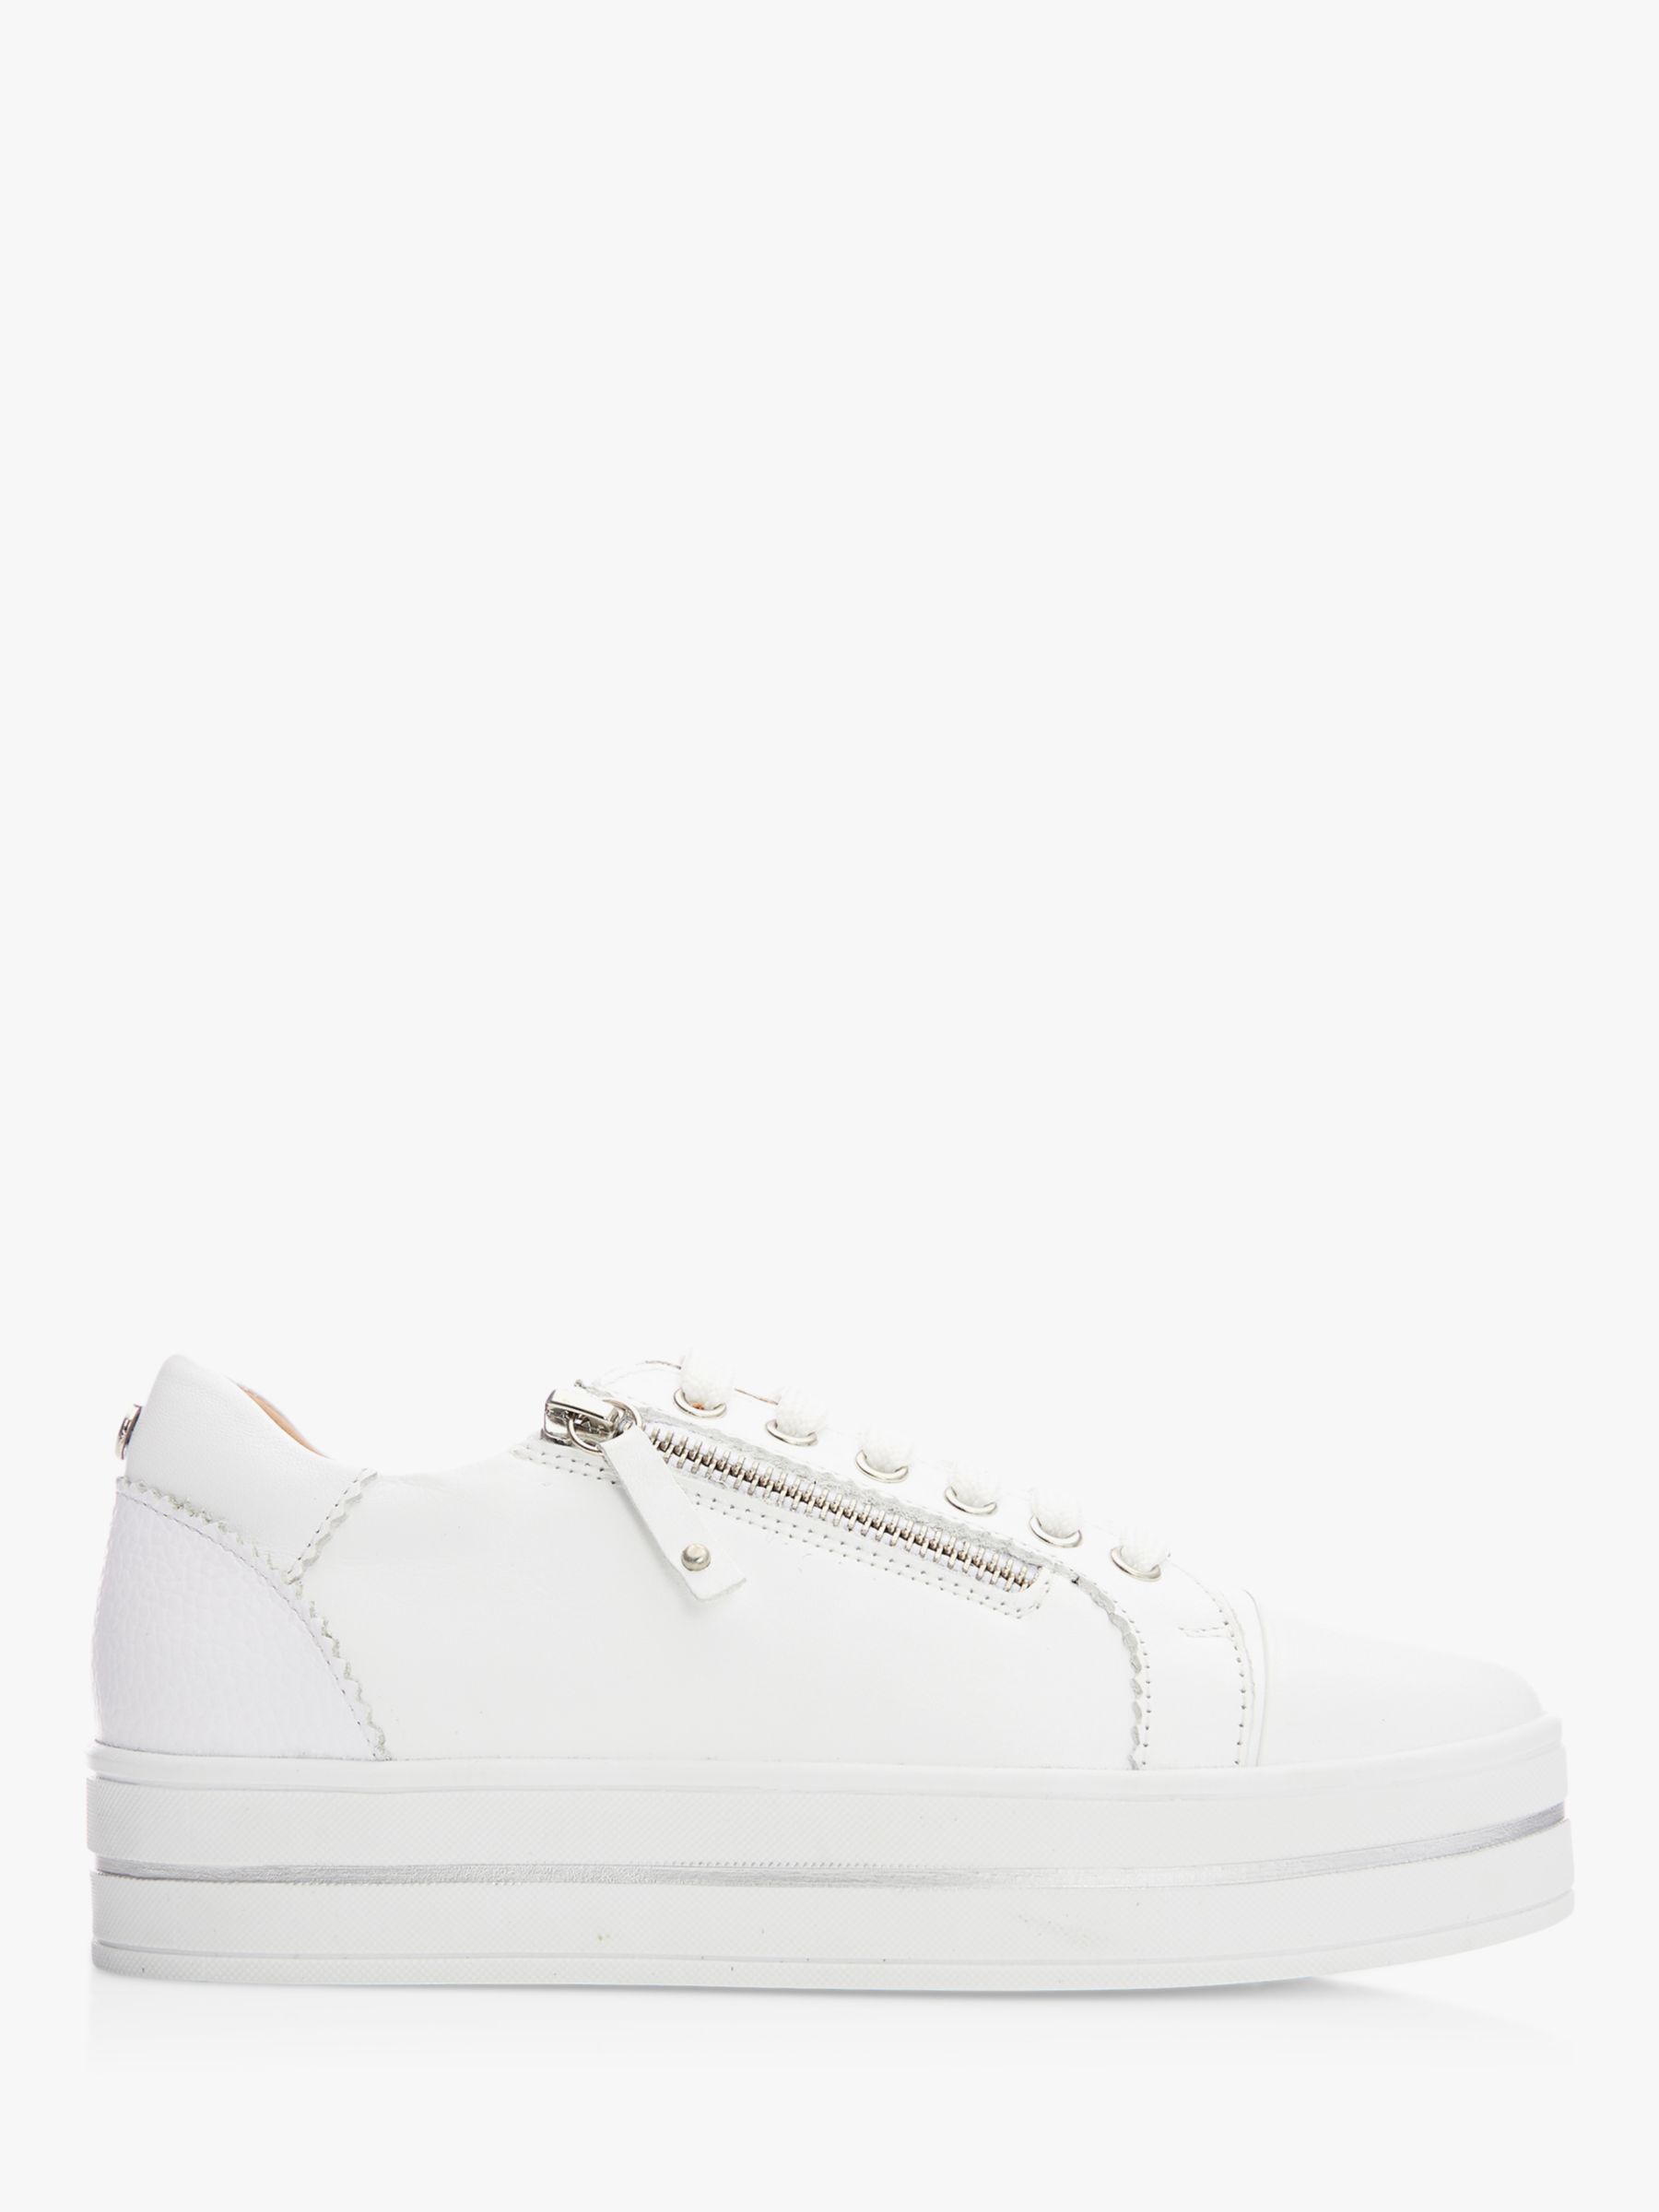 Moda in Pelle Aross Leather Flatform Zip Up Trainers, White at John ...